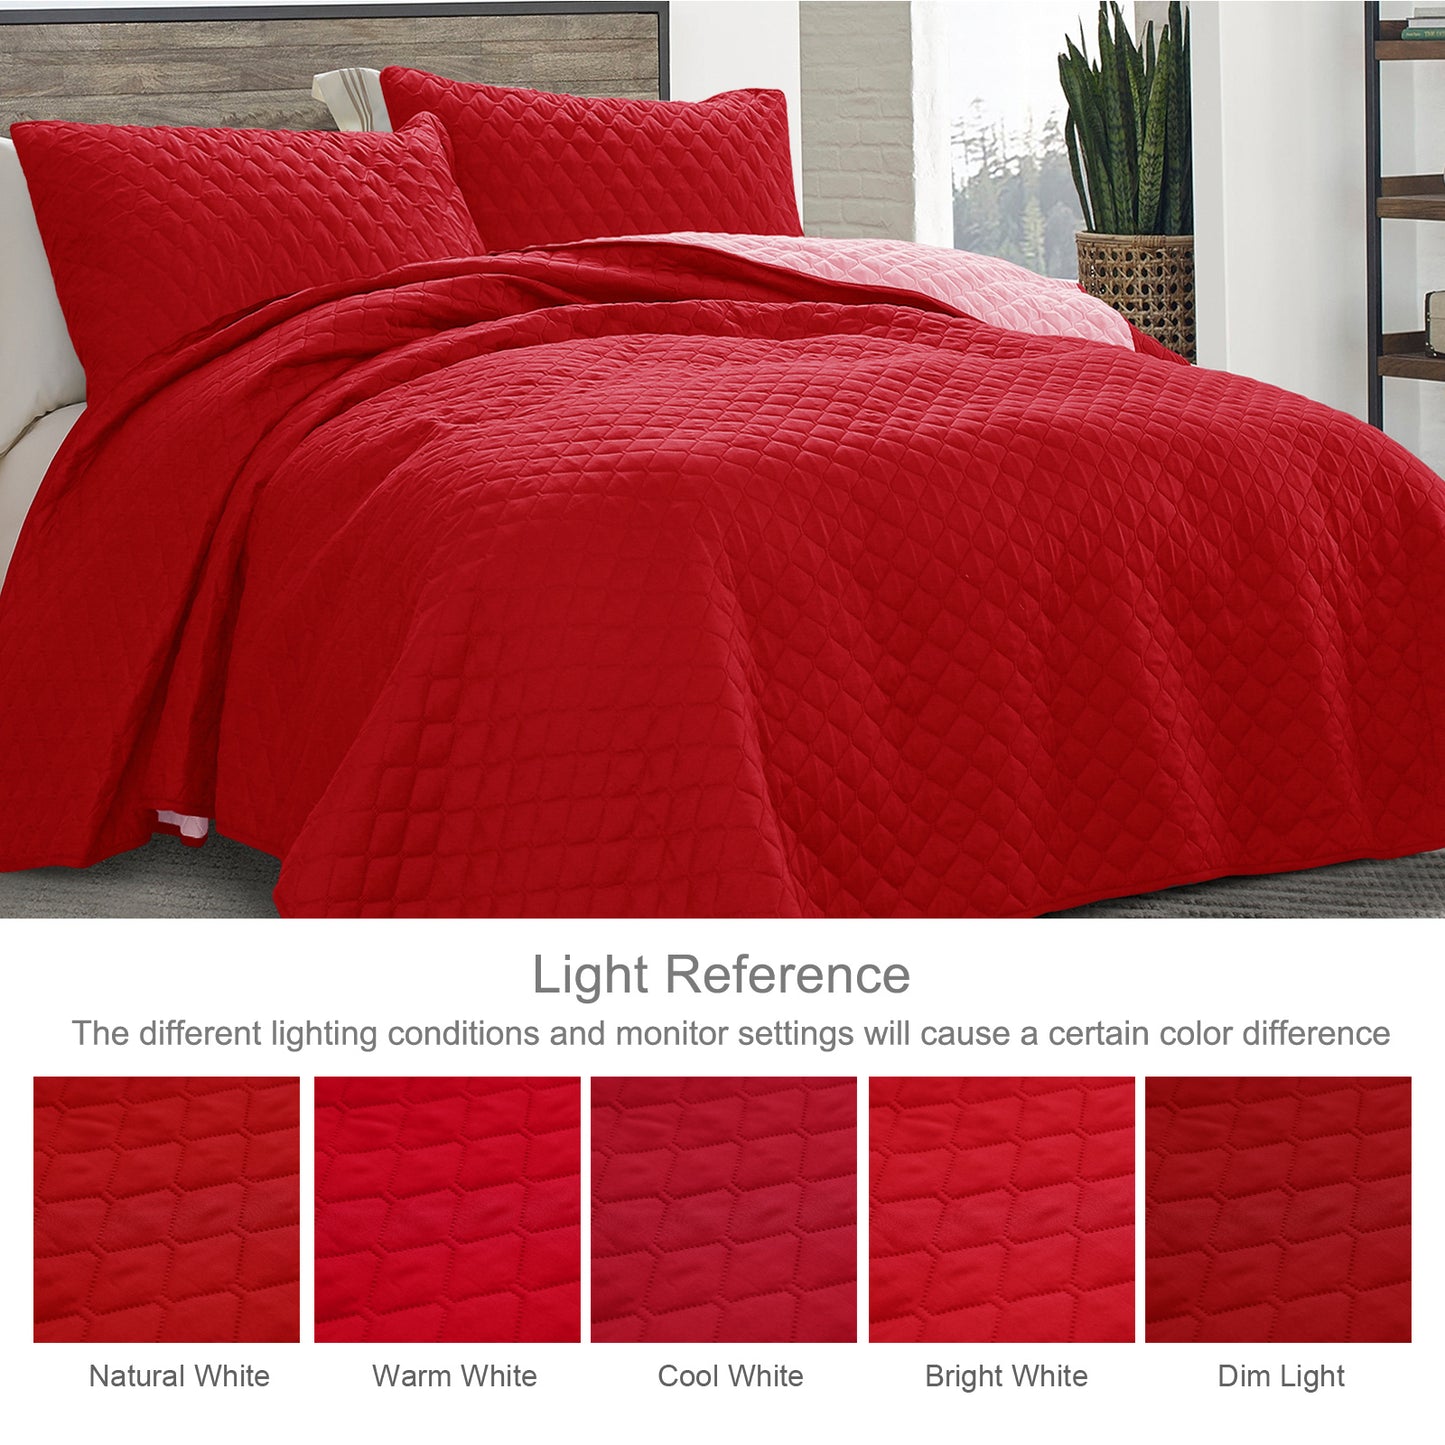 Exclusivo Mezcla California King Quilt Bedding Set with Pillow Shams, Lightweight Quilts Cal Oversized King Size, Soft Bedspreads Bed Coverlets for All Seasons - (Red, 112"x104")